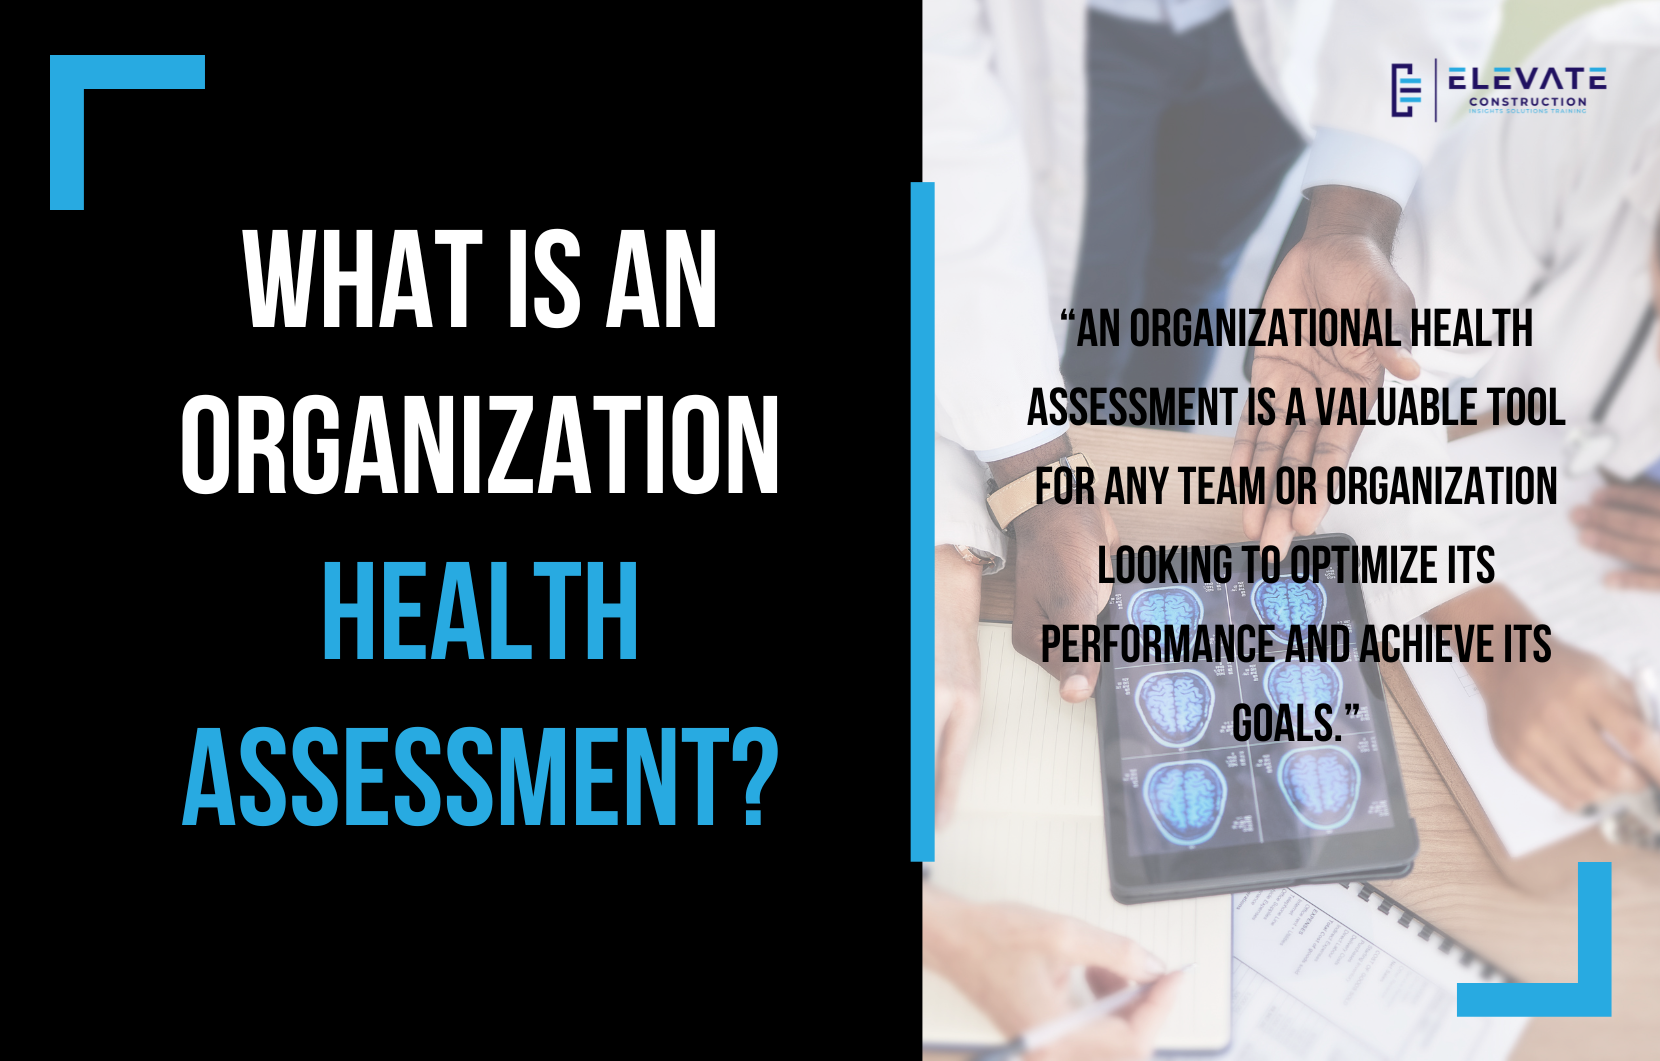 What Is An Organizational Health Assessment?